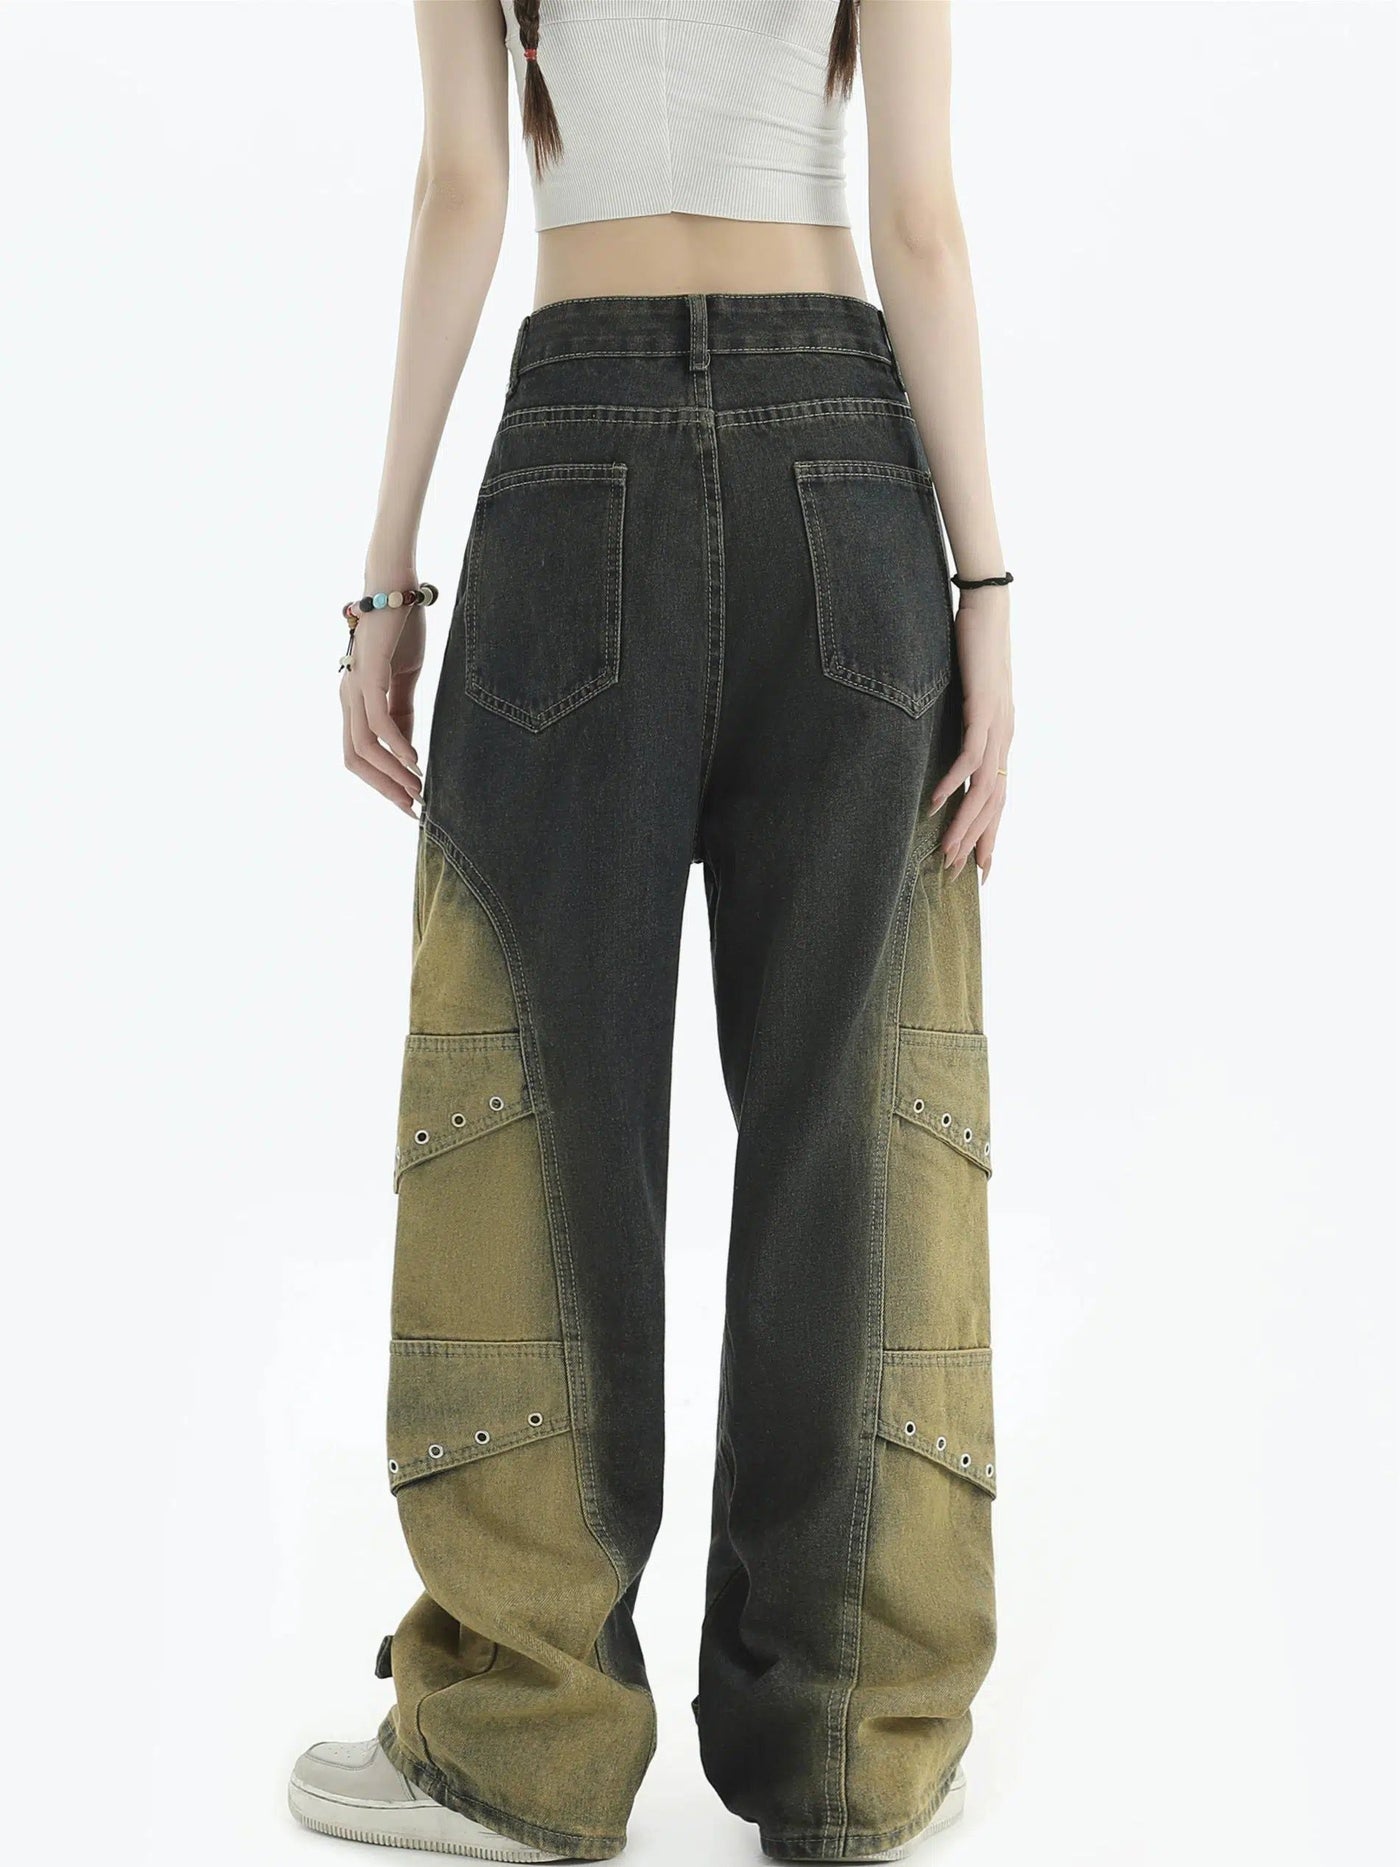 Yellow Fade Highlight Jeans Korean Street Fashion Jeans By INS Korea Shop Online at OH Vault